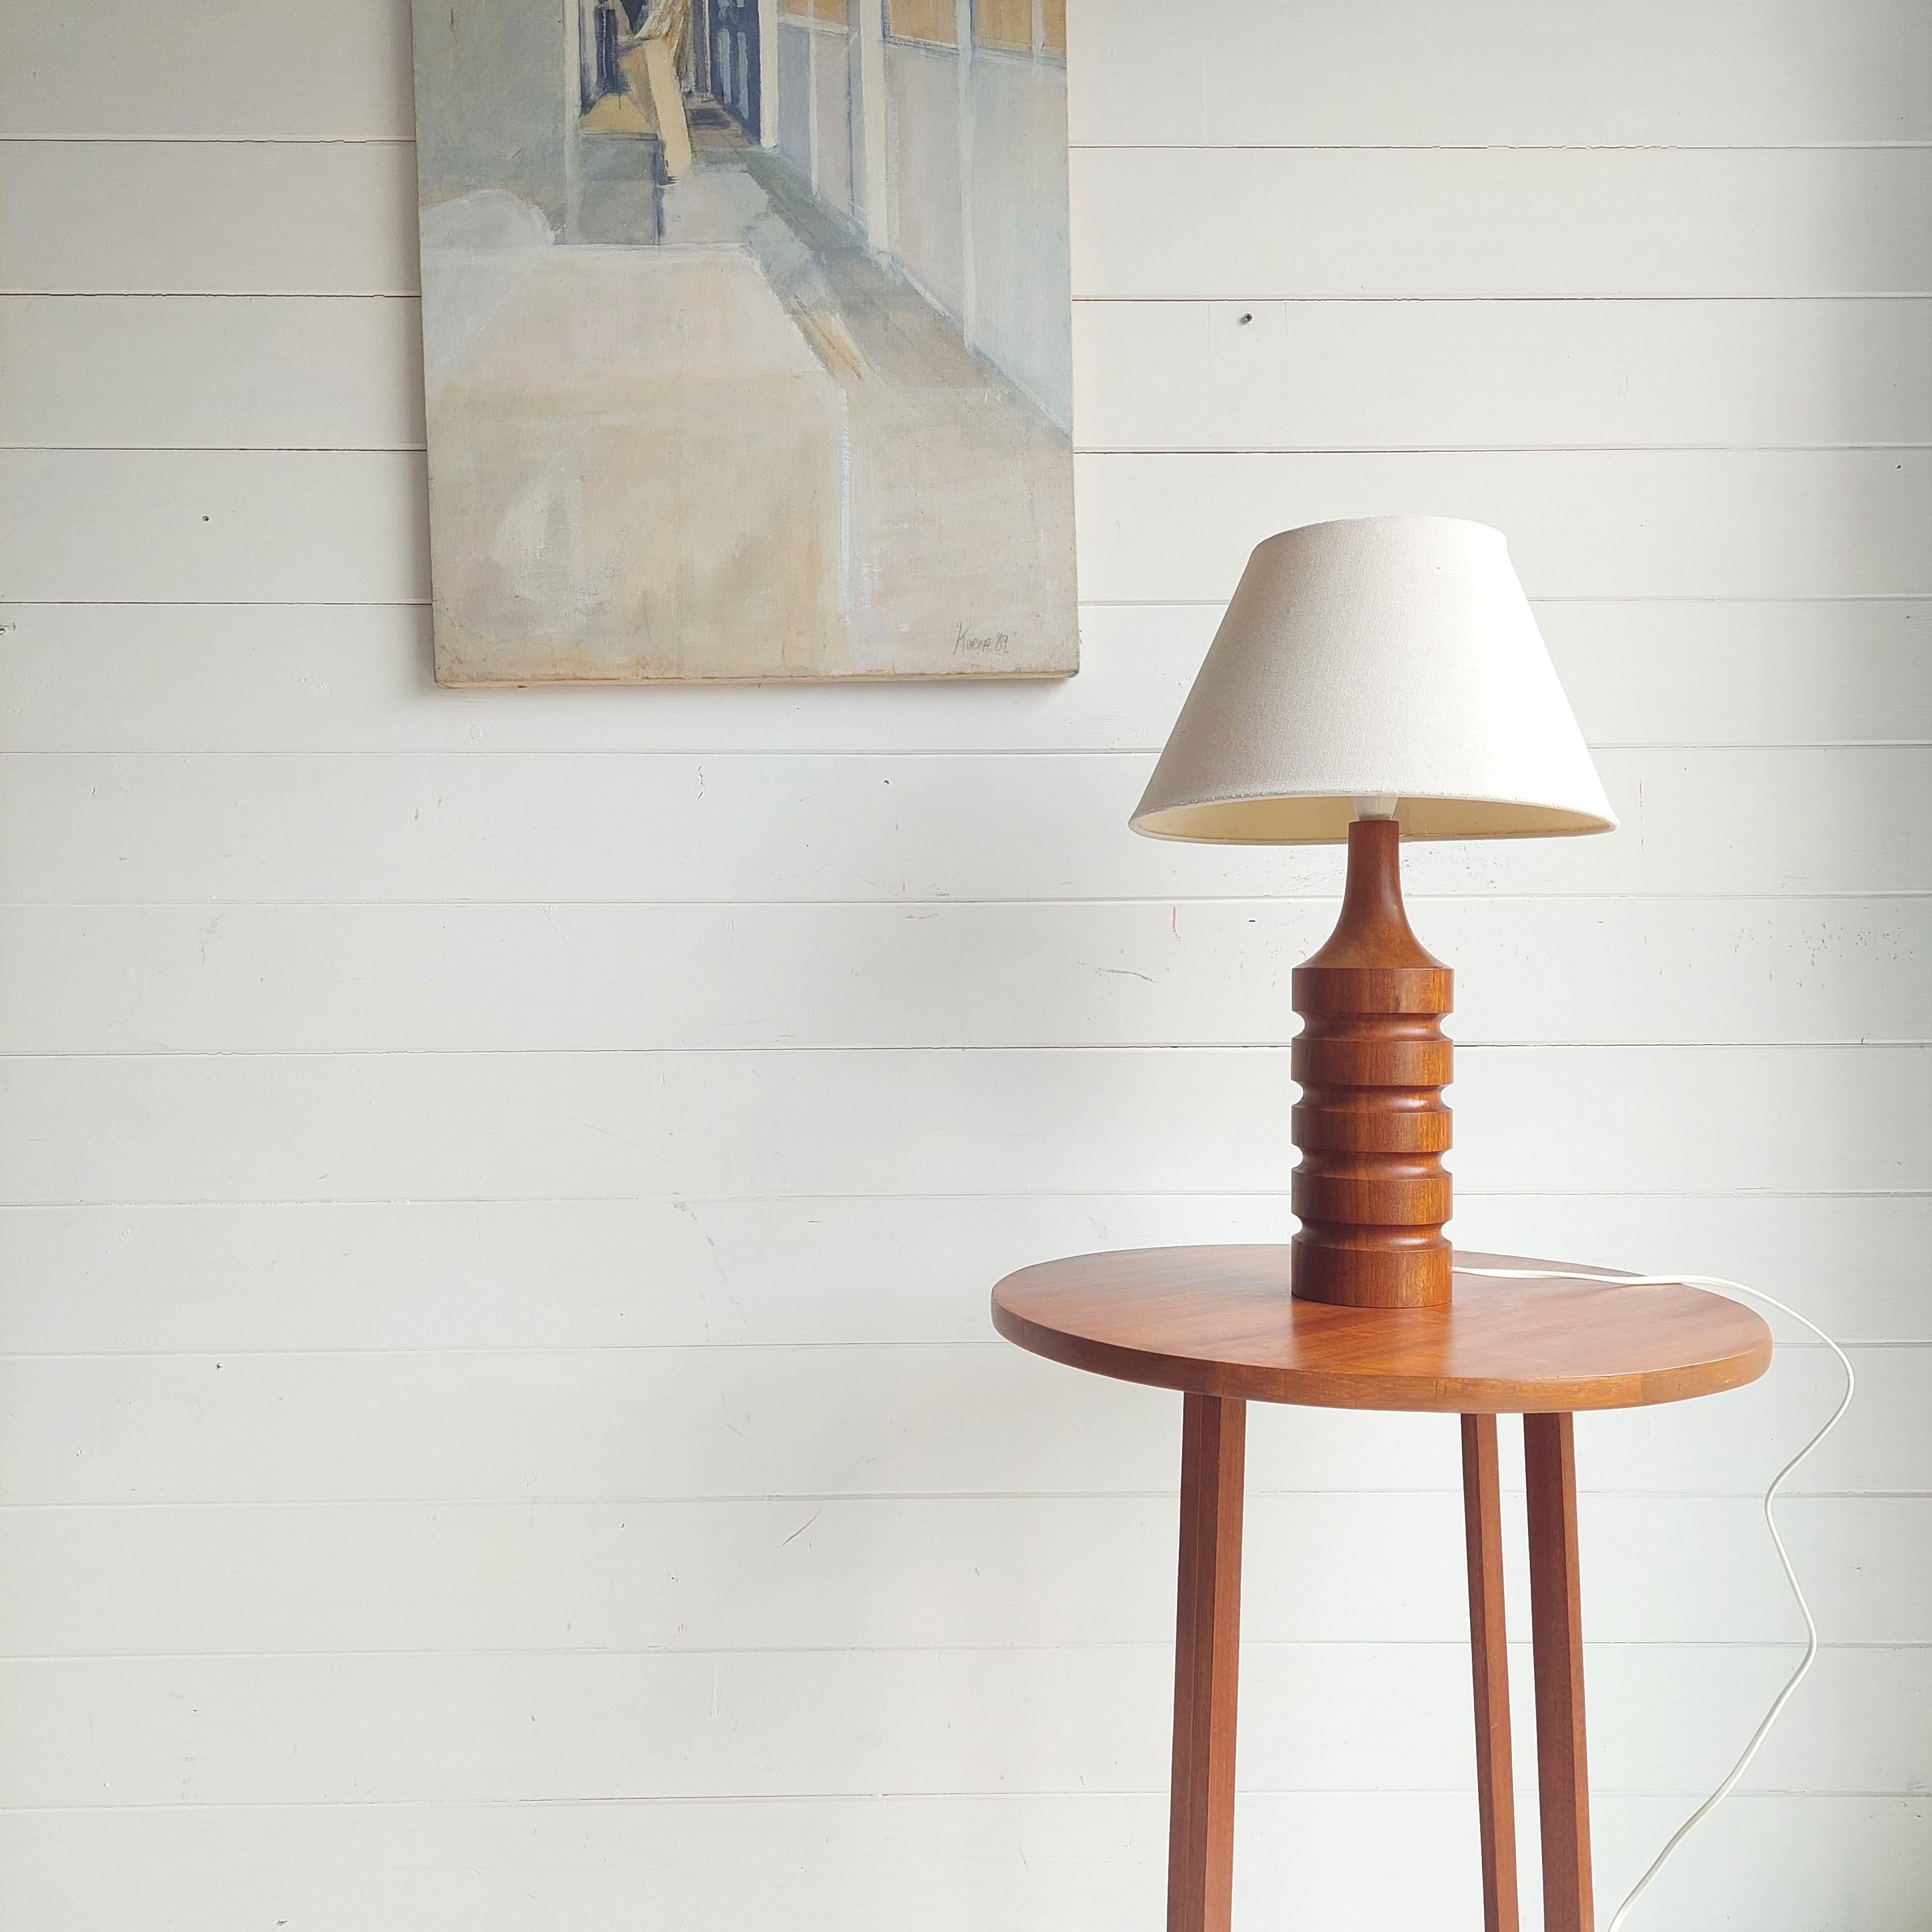 Teak Danish table lamp base dating from the 60s
This beautiful teak table lamp base is the perfect addition to any home.

The sculptural aesthetic of the chunky ribbed design has a very handmade feel about it that makes this piece brim with